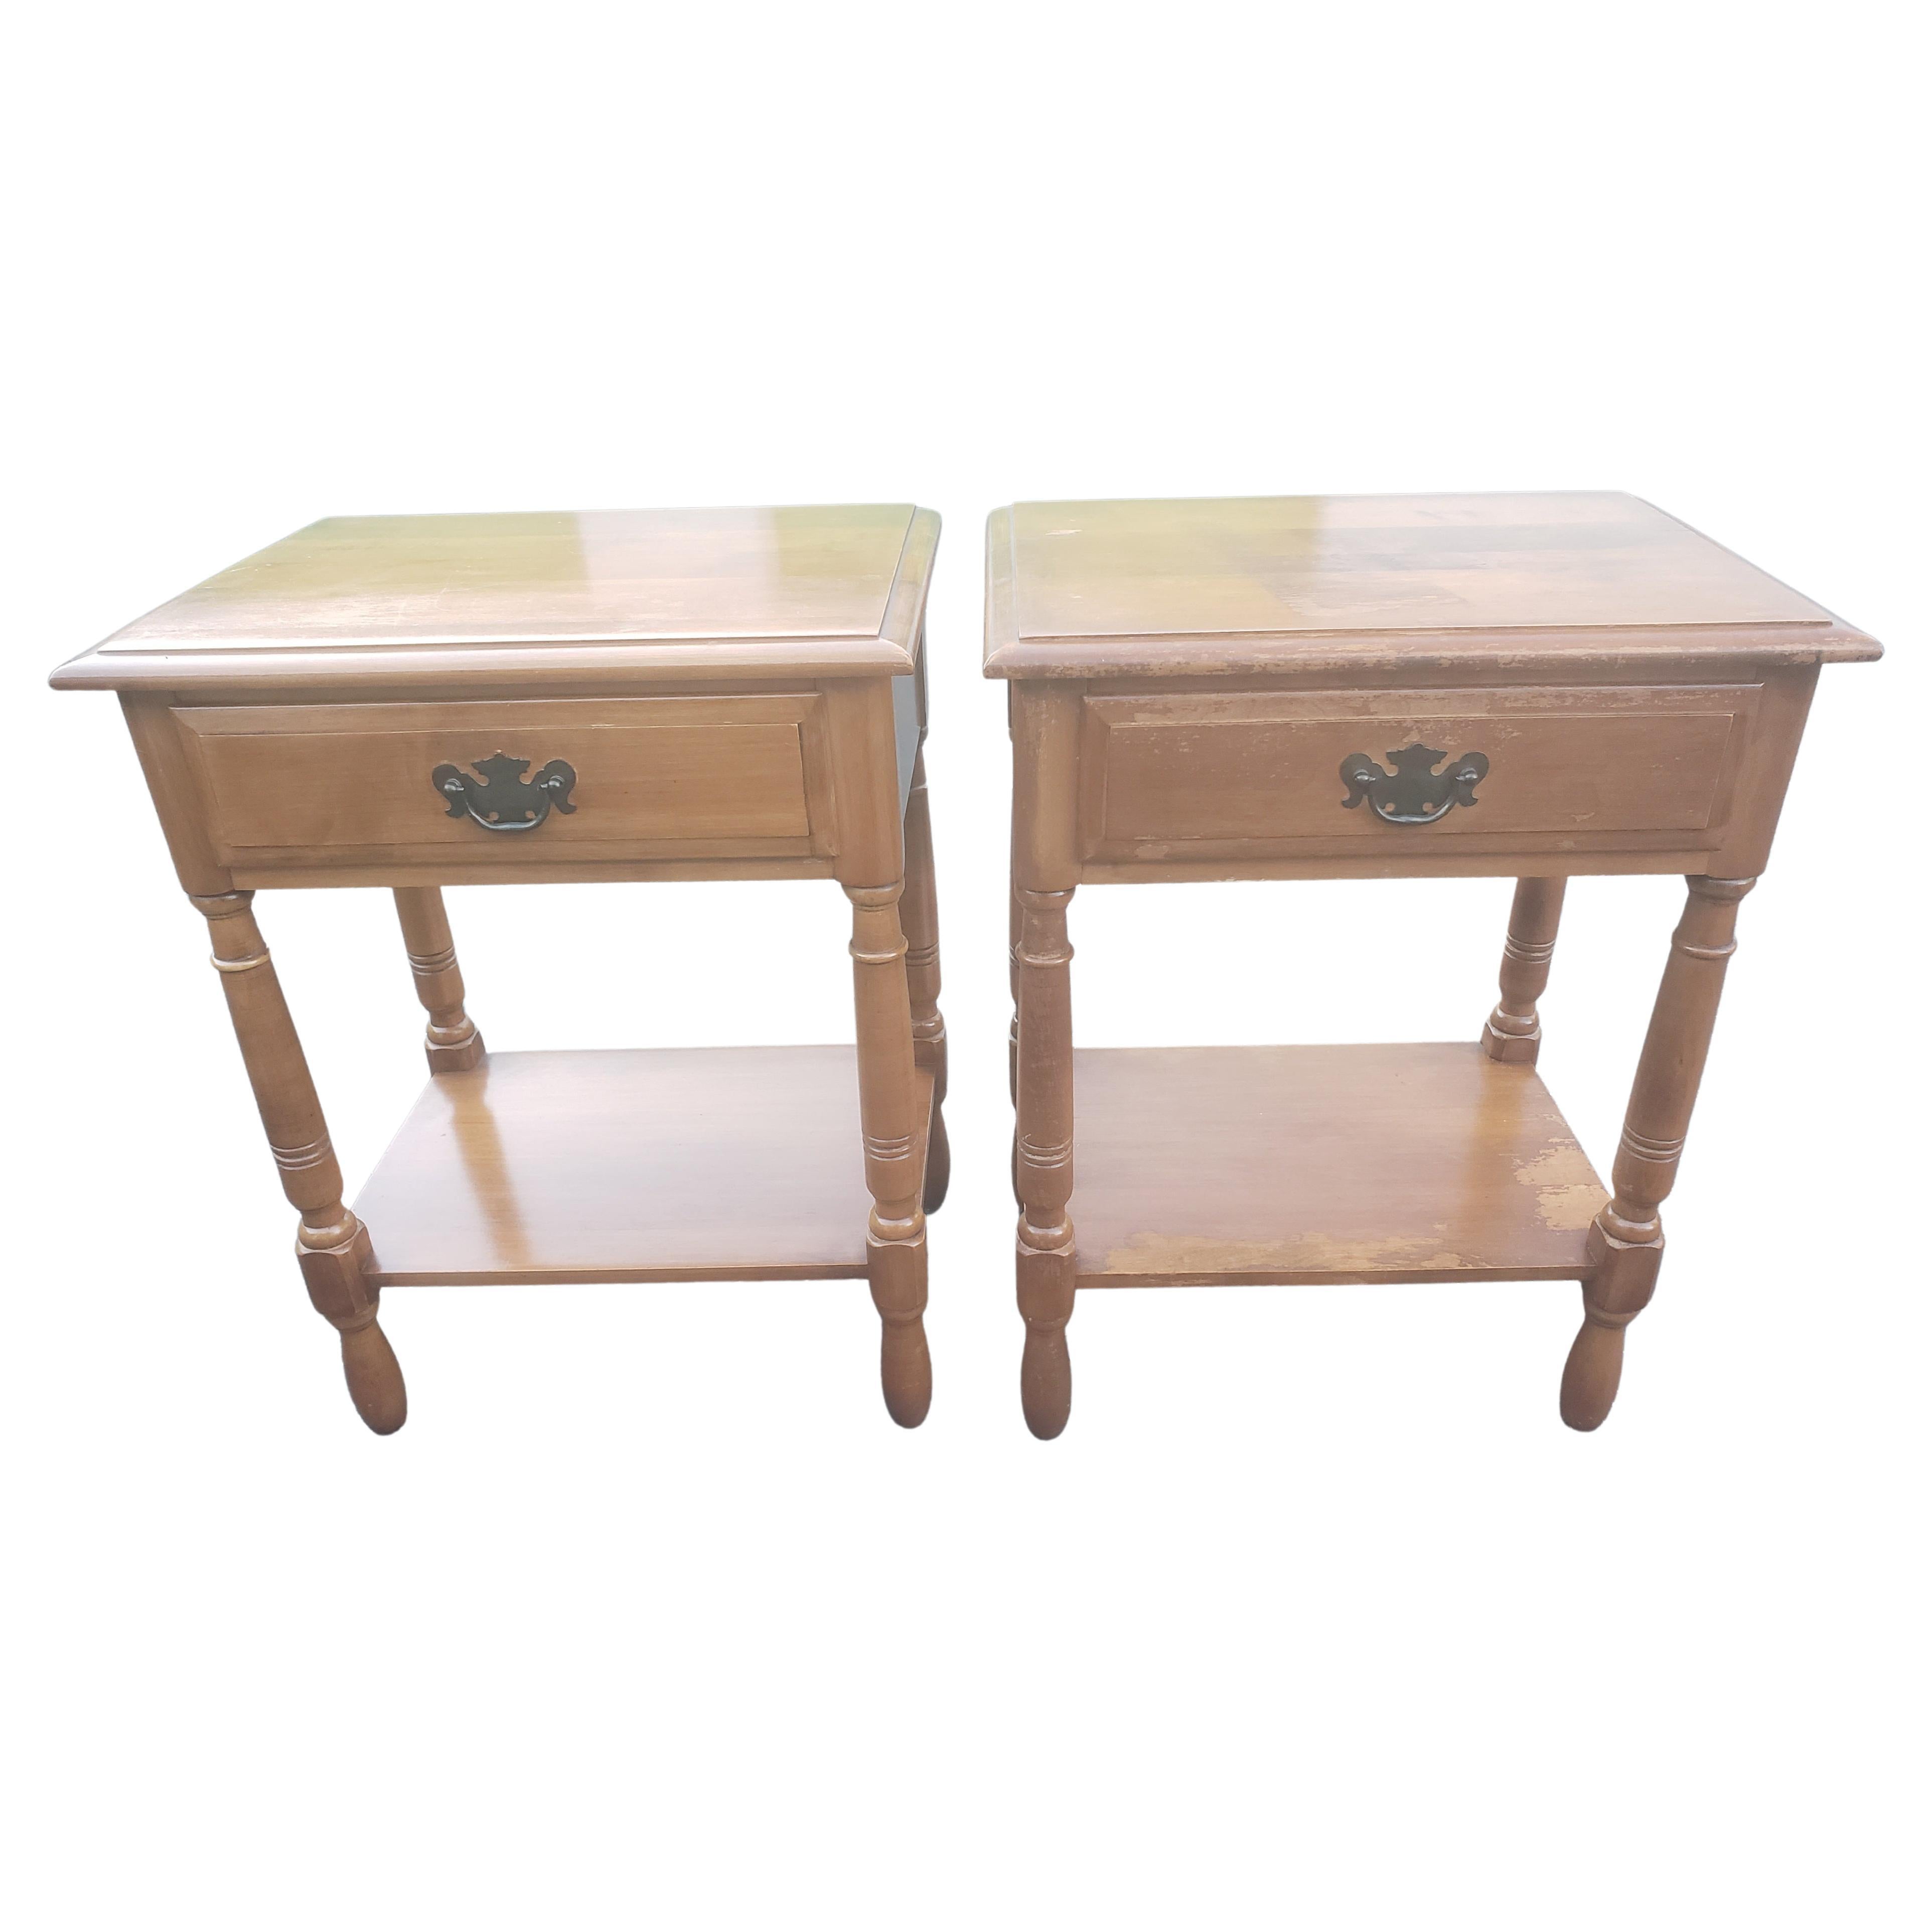 1950s Kling Solid Maple American Colonial Side Table Nighstands a Pair For Sale